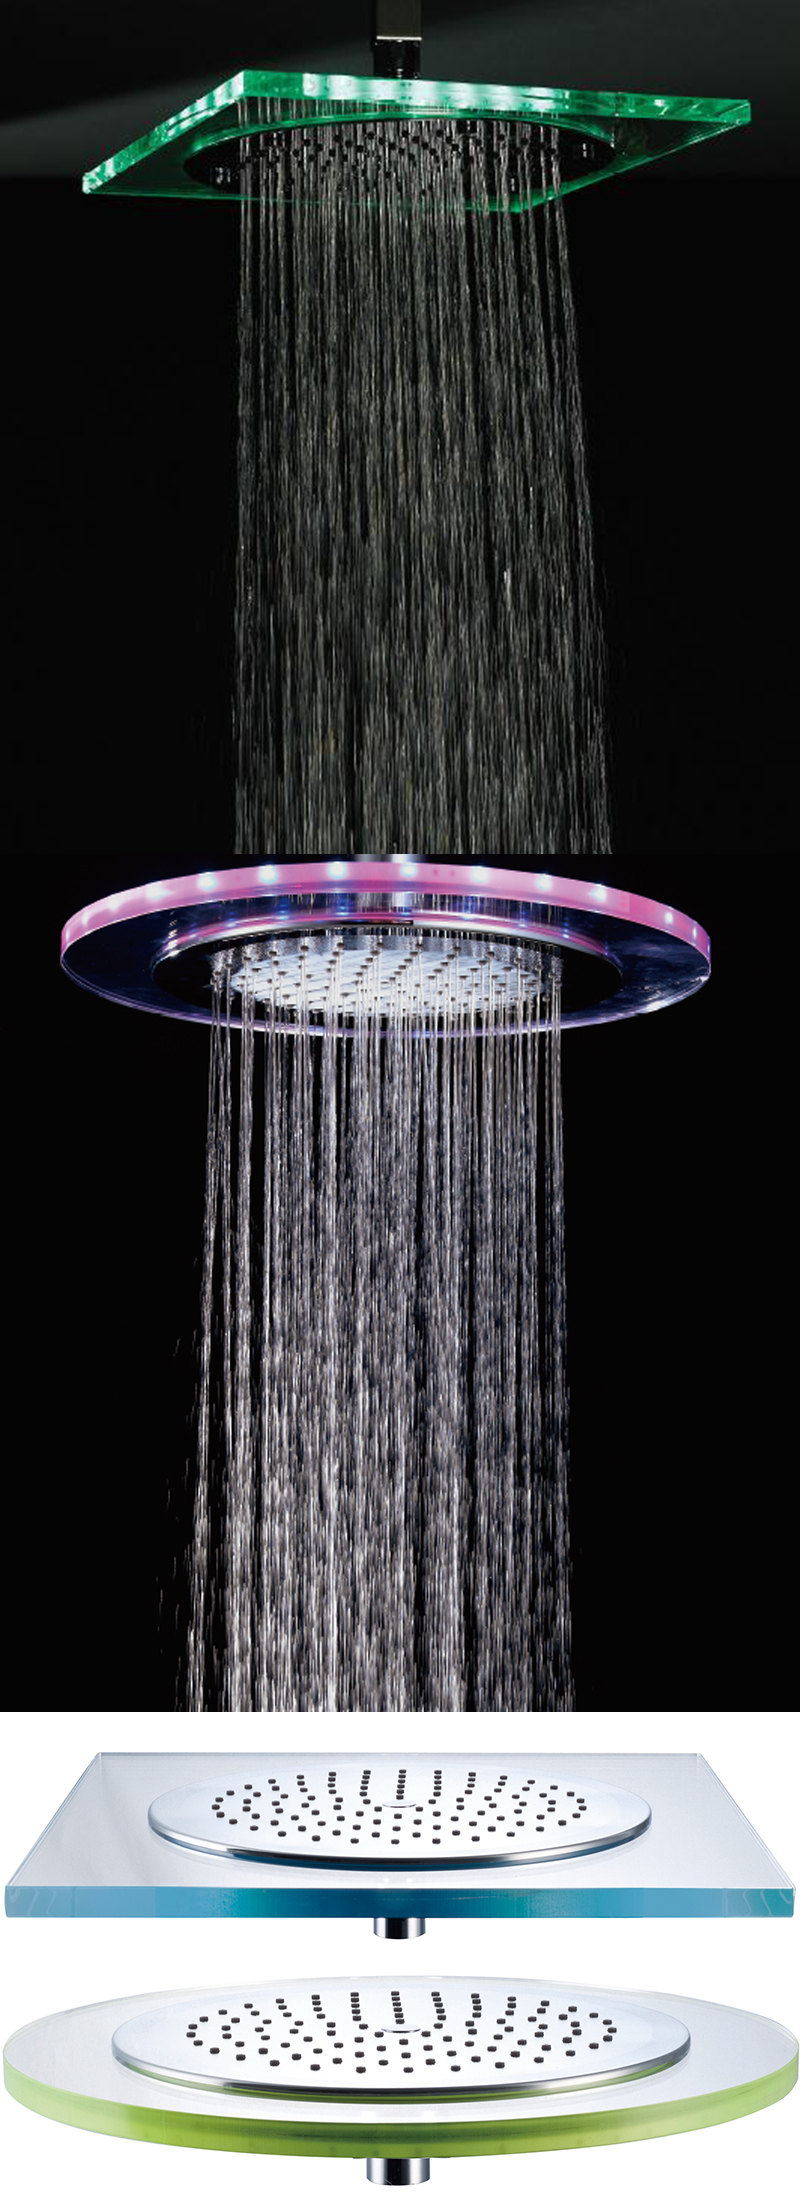 Kaiping Manufacturer ABS LED Shower Head